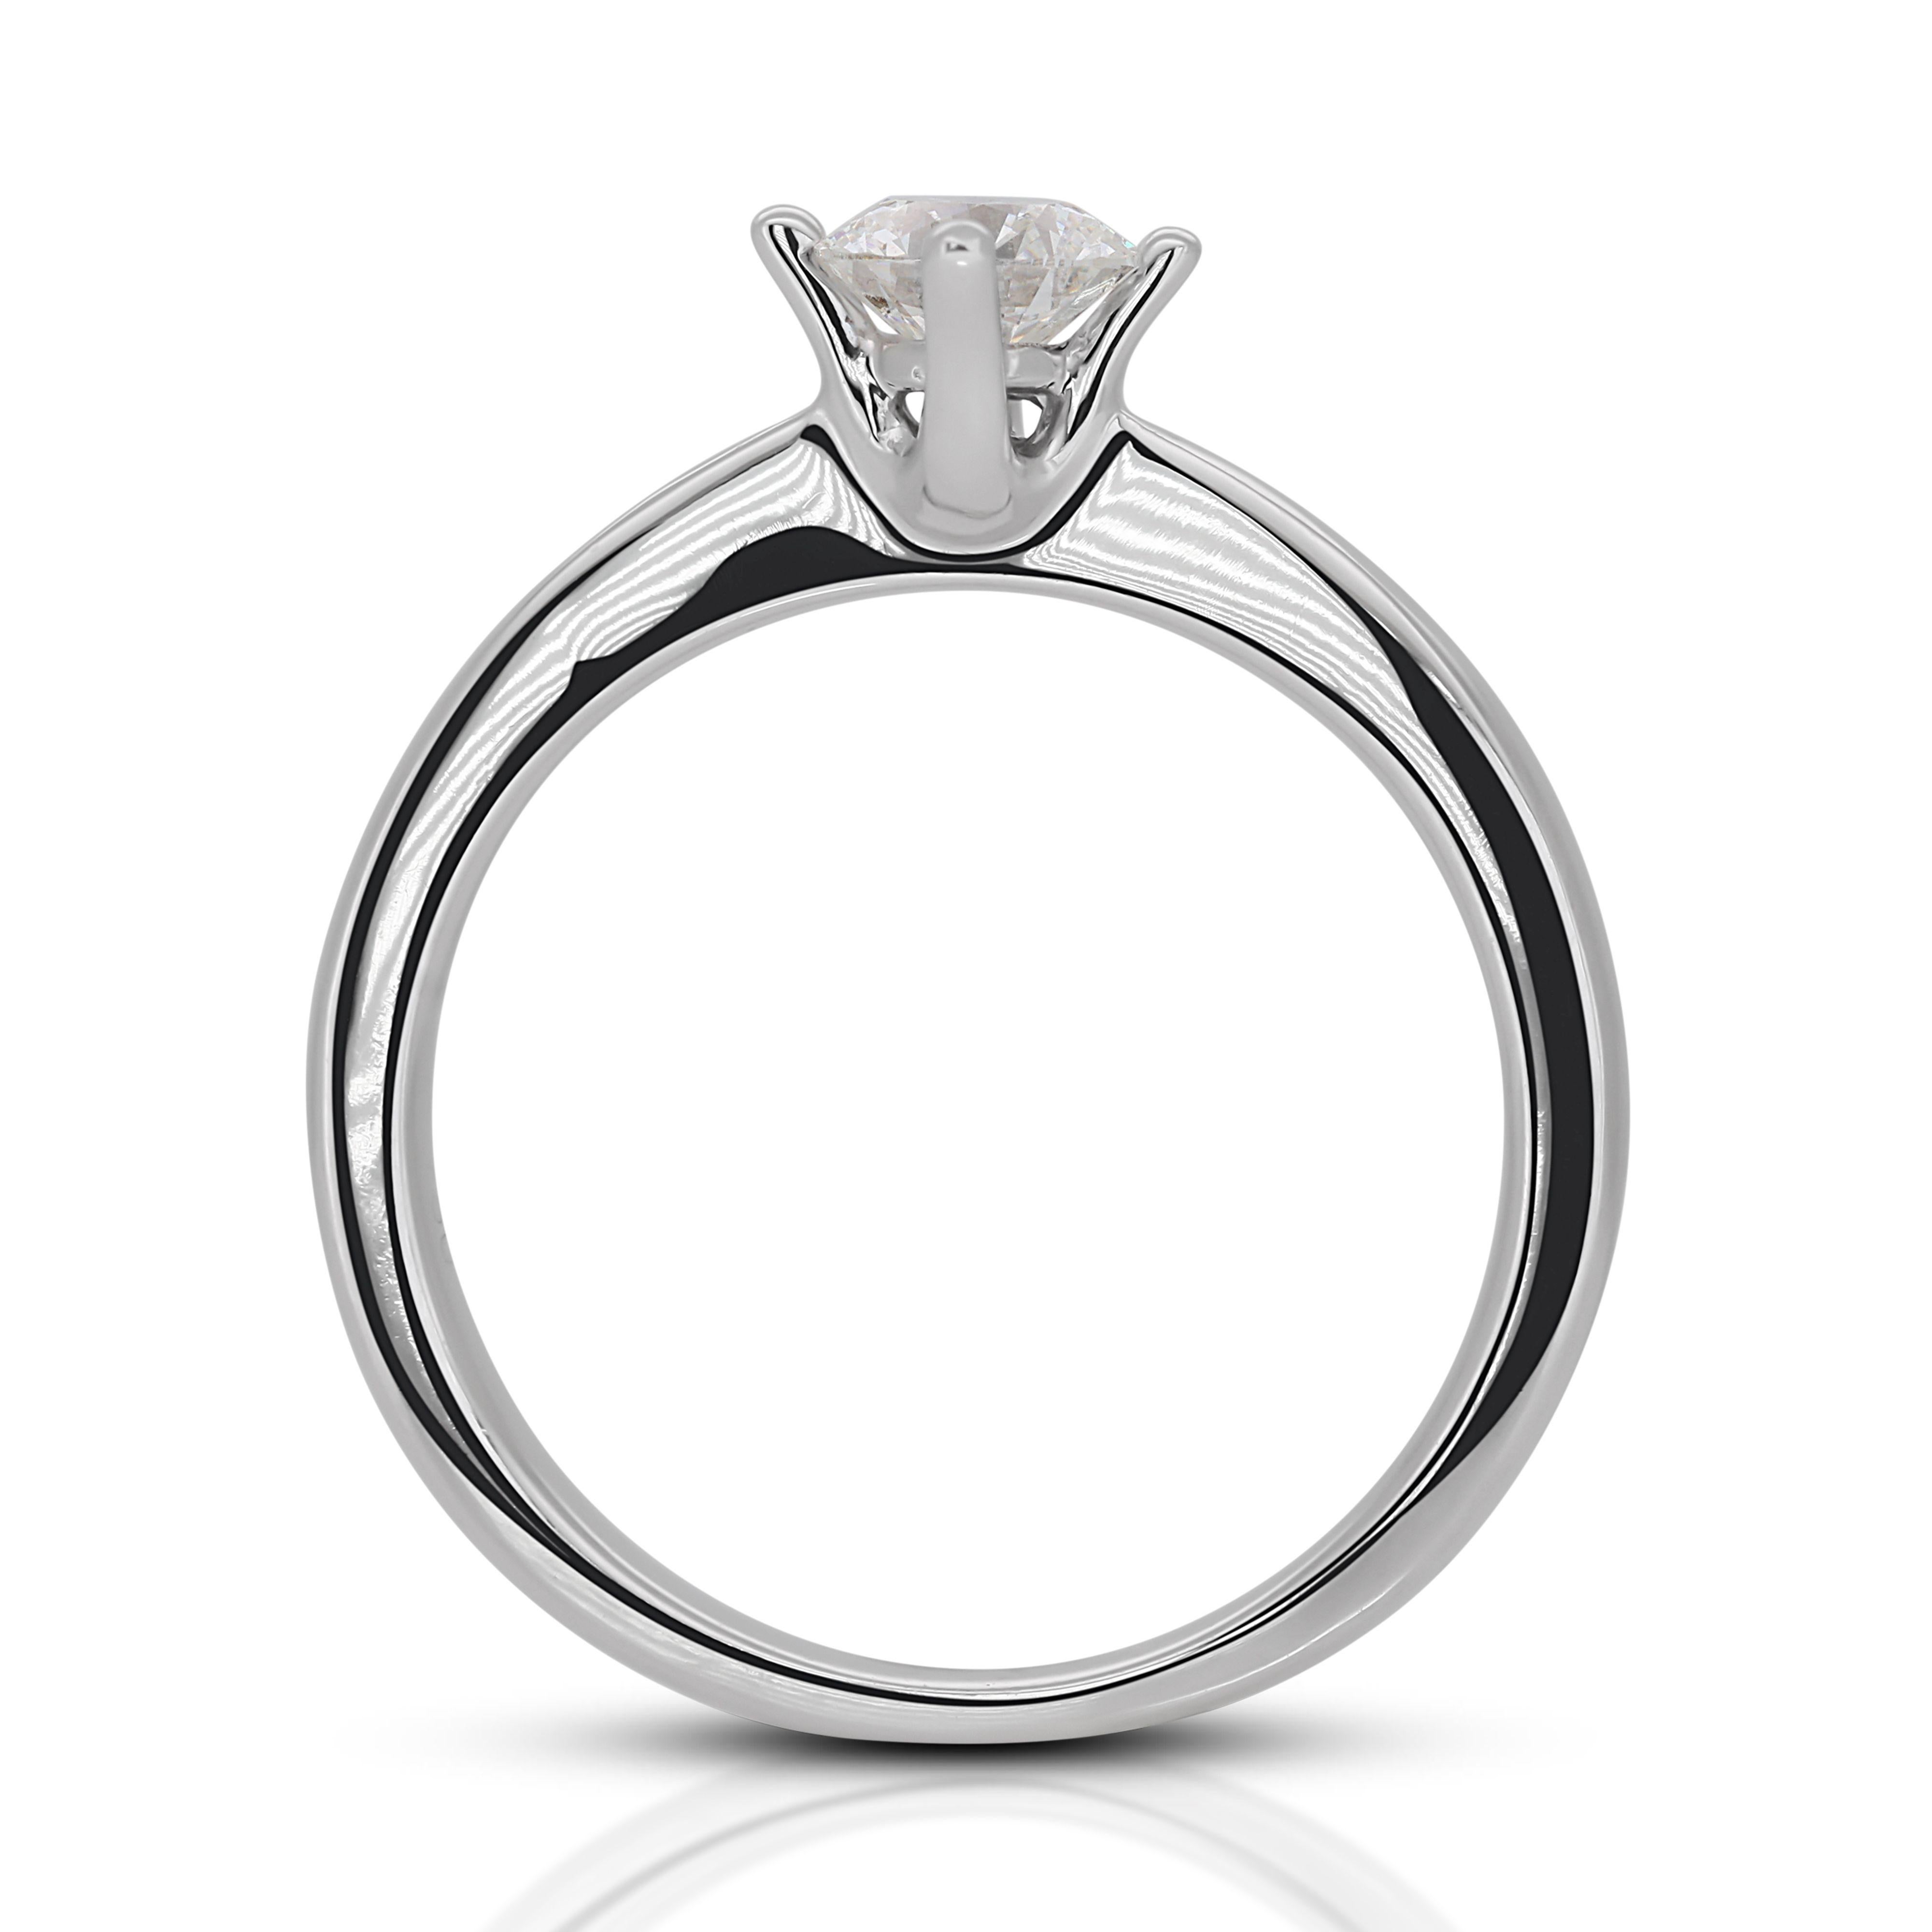 Round Cut Beautiful 18K White Gold Solitaire Diamond Ring with 0.32ct Diamond For Sale